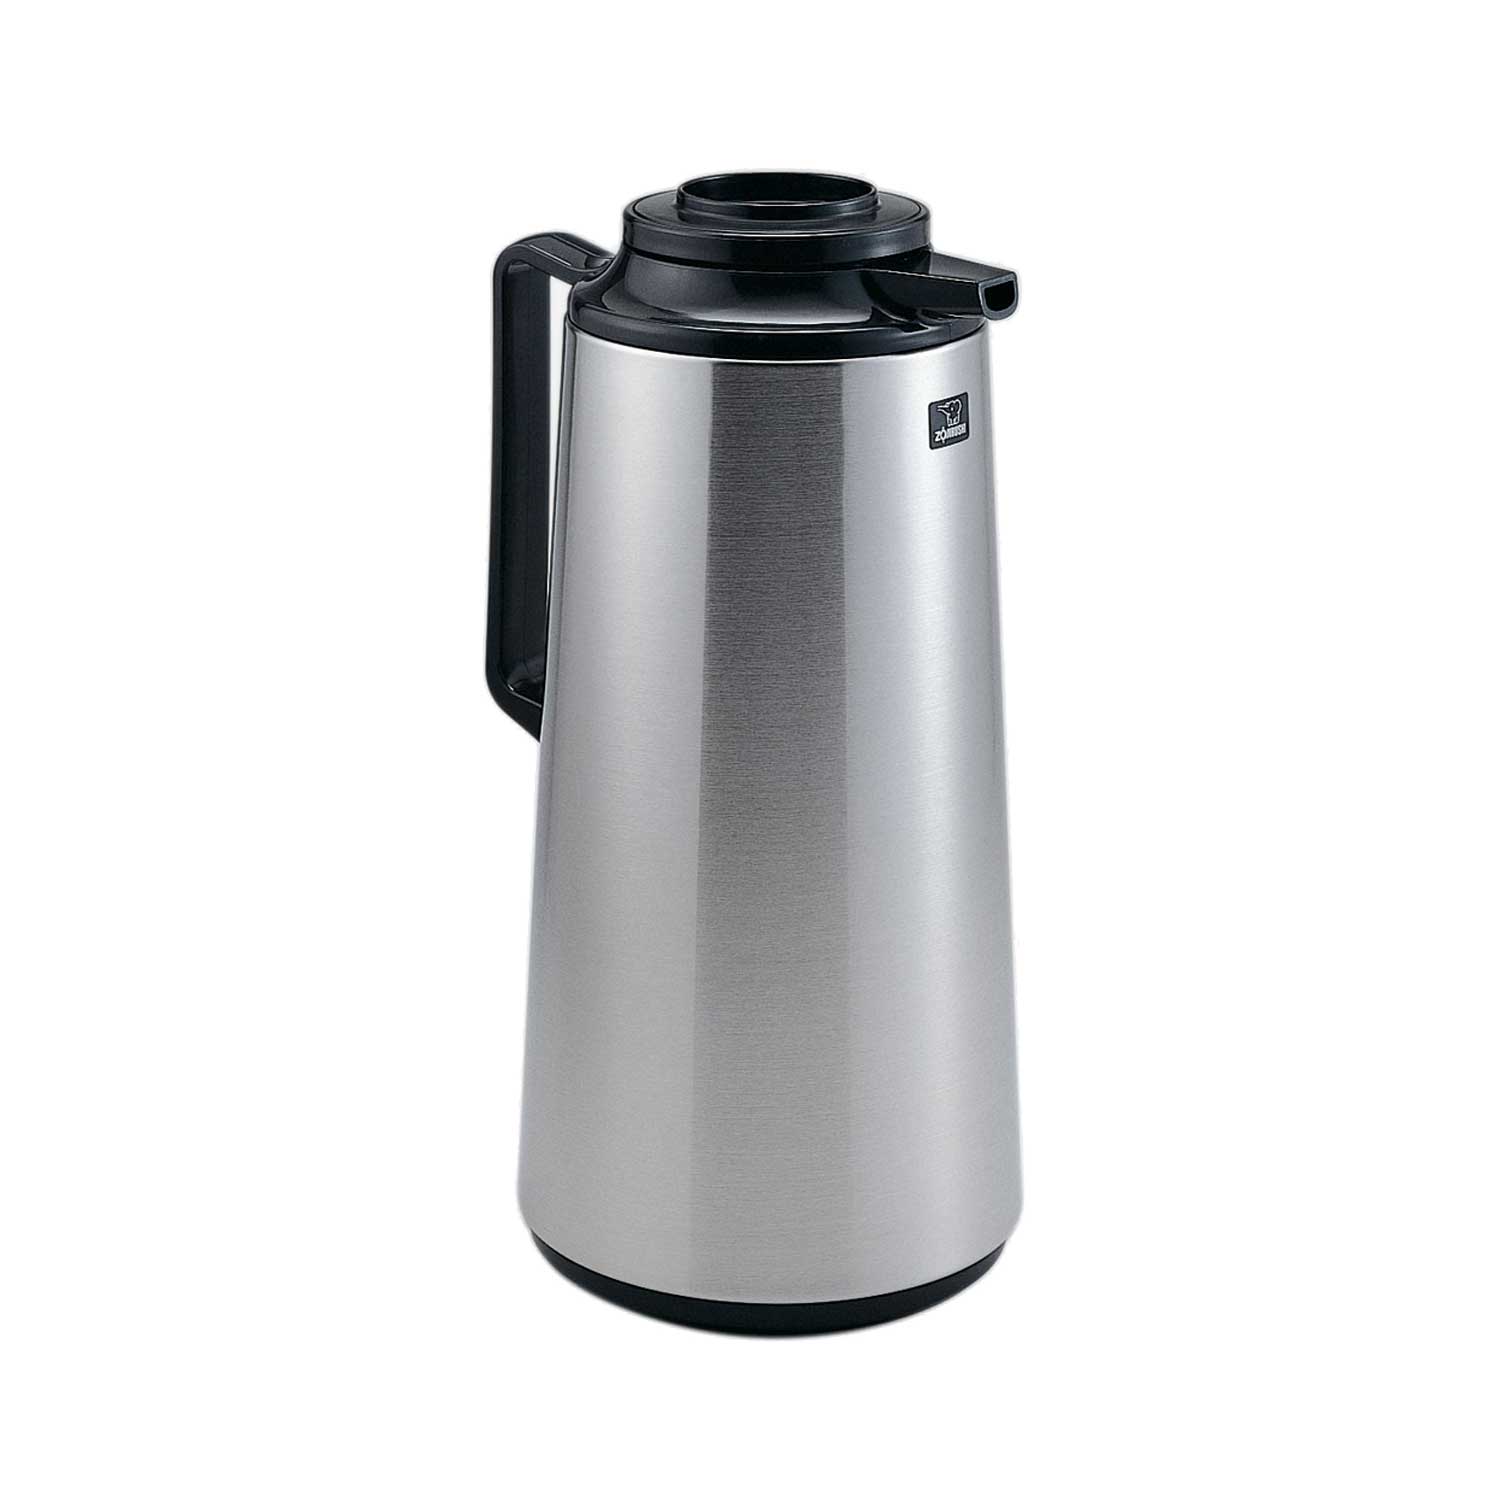 Bunn 62 oz. Zojirushi Stainless Steel Deluxe Thermal Carafe with